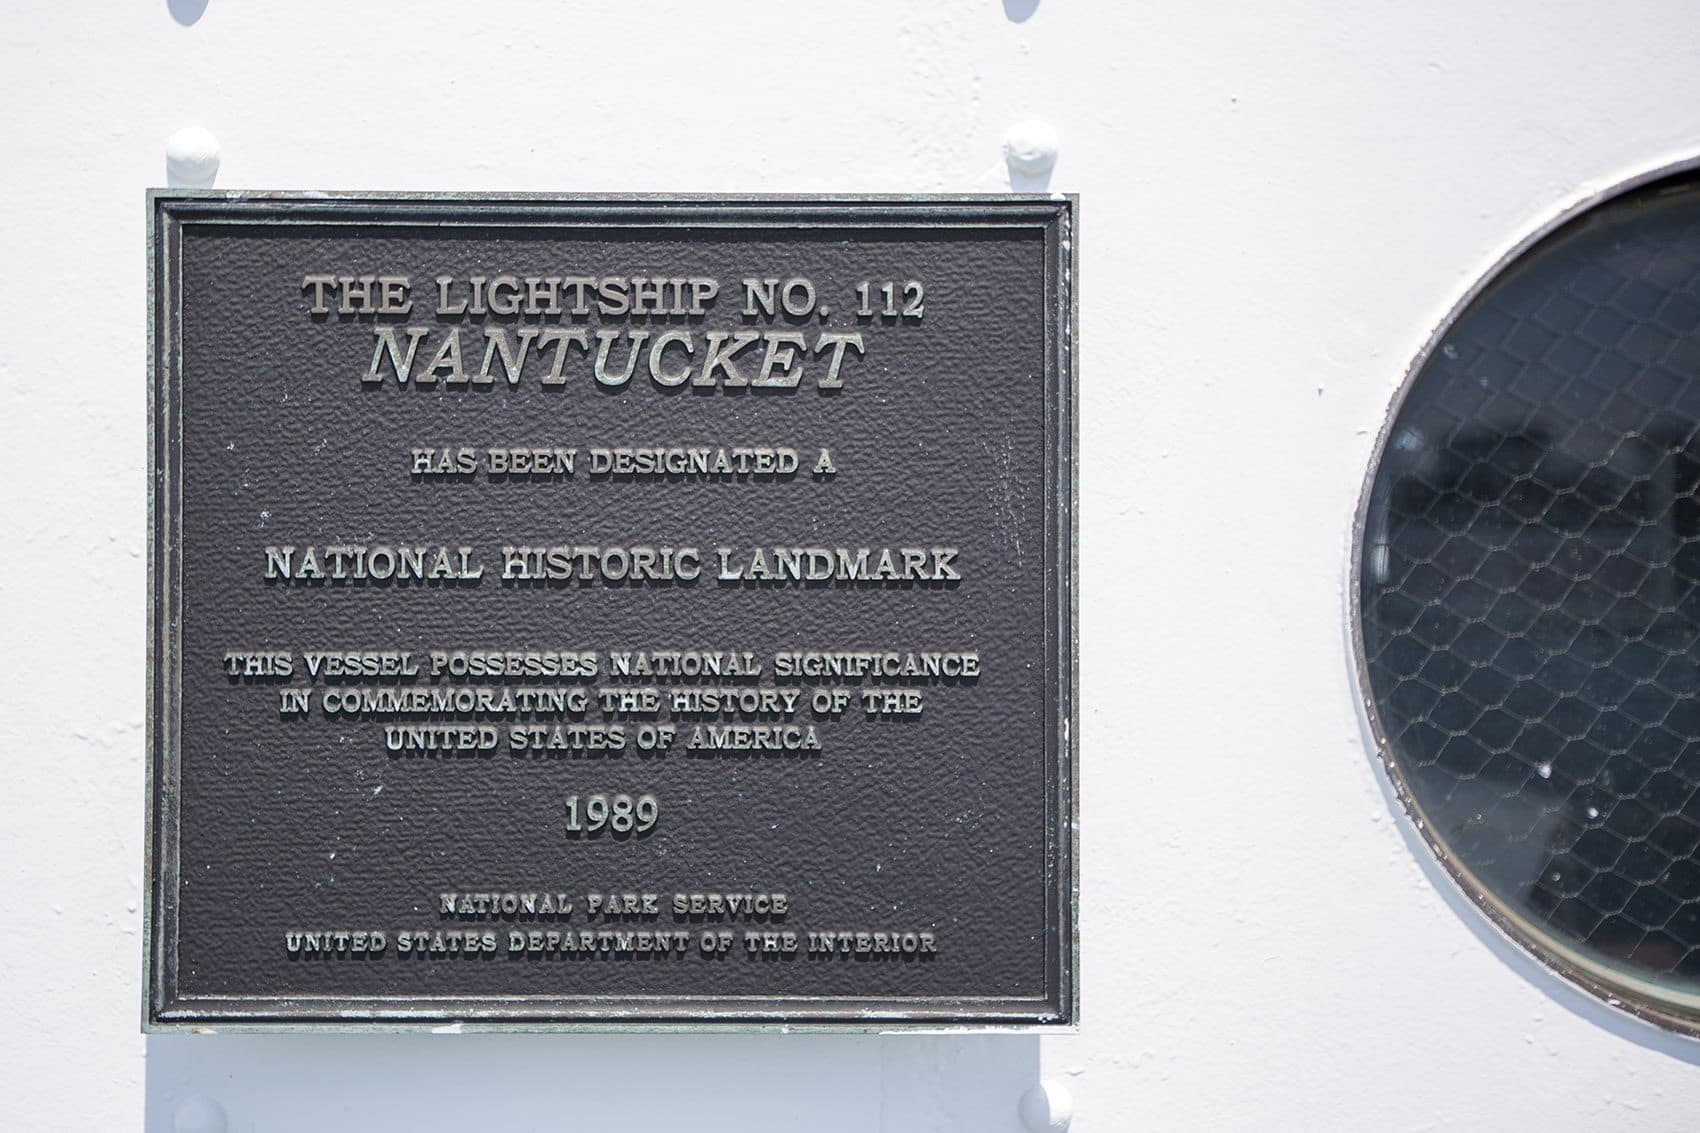 Touring The Nantucket Lightship, Largest Built In The U.S.